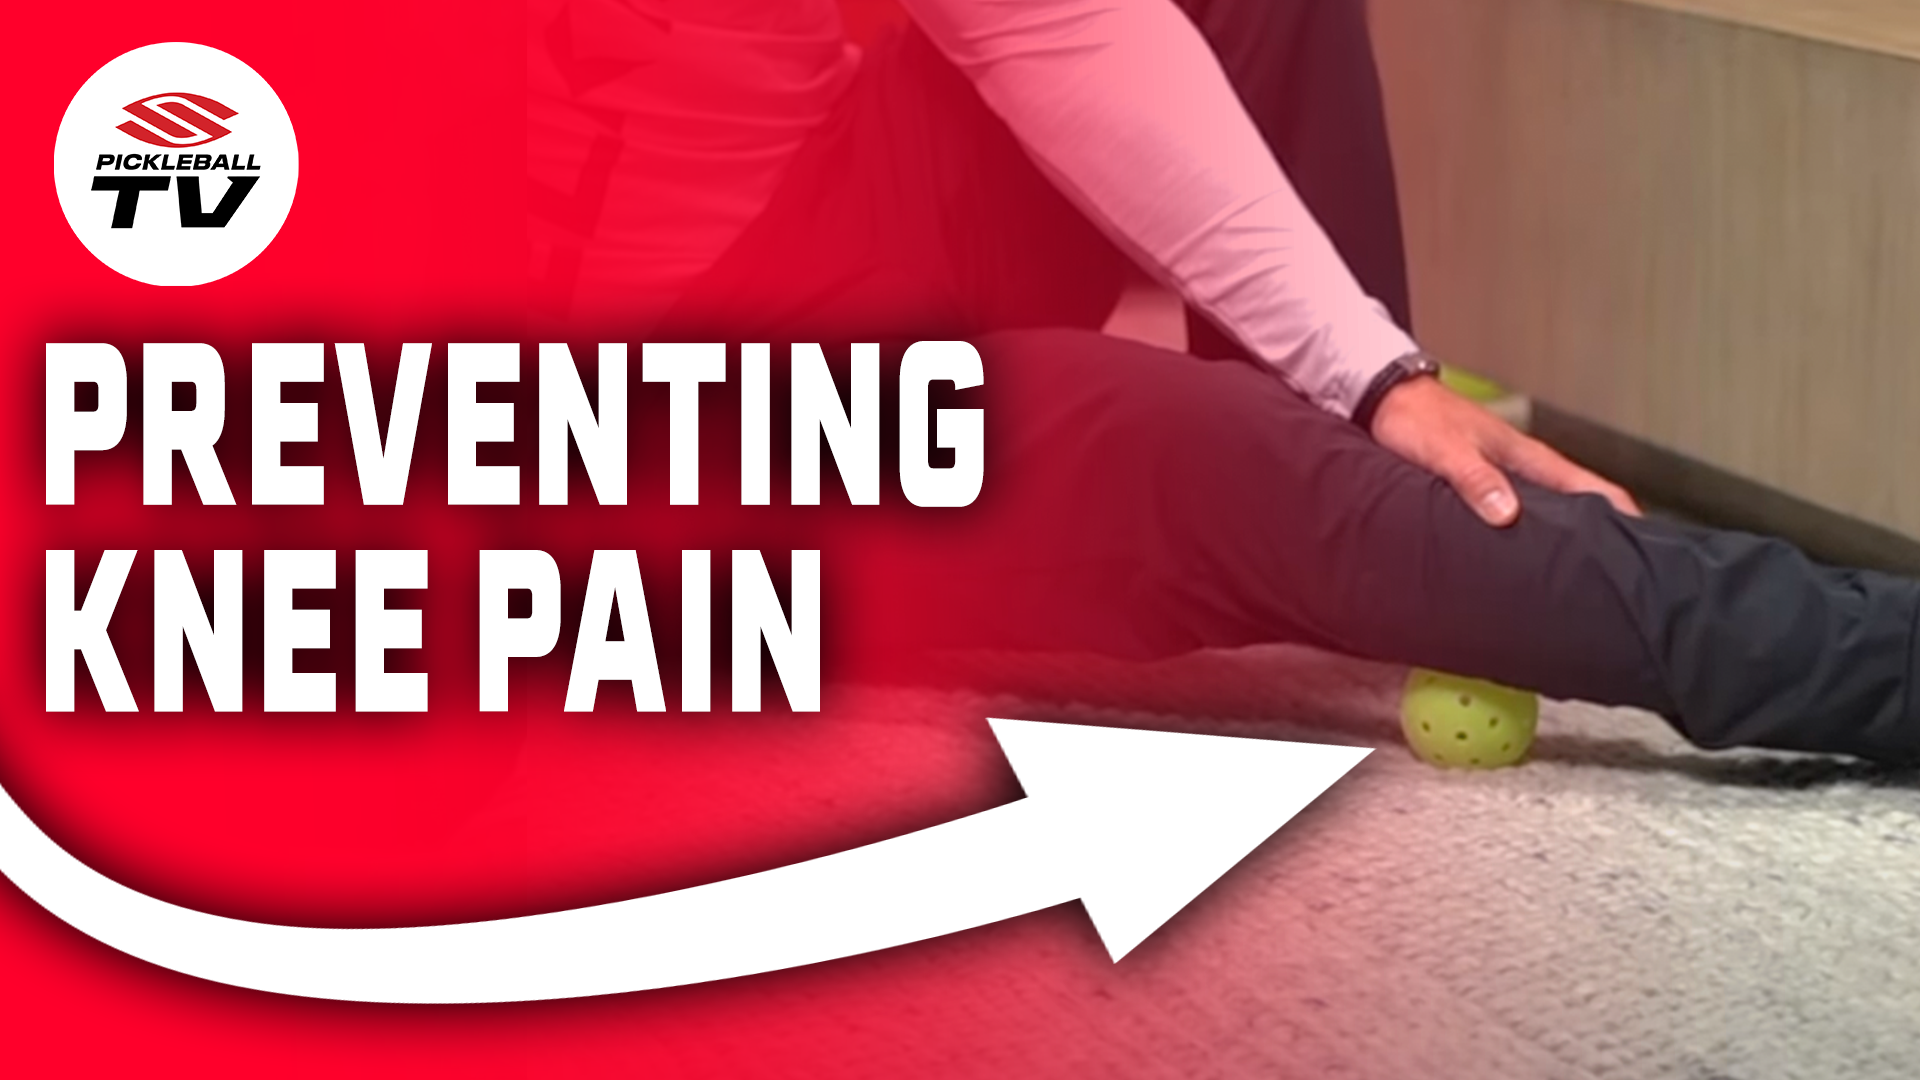 You can use a pickleball to alleviate knee pain at home.